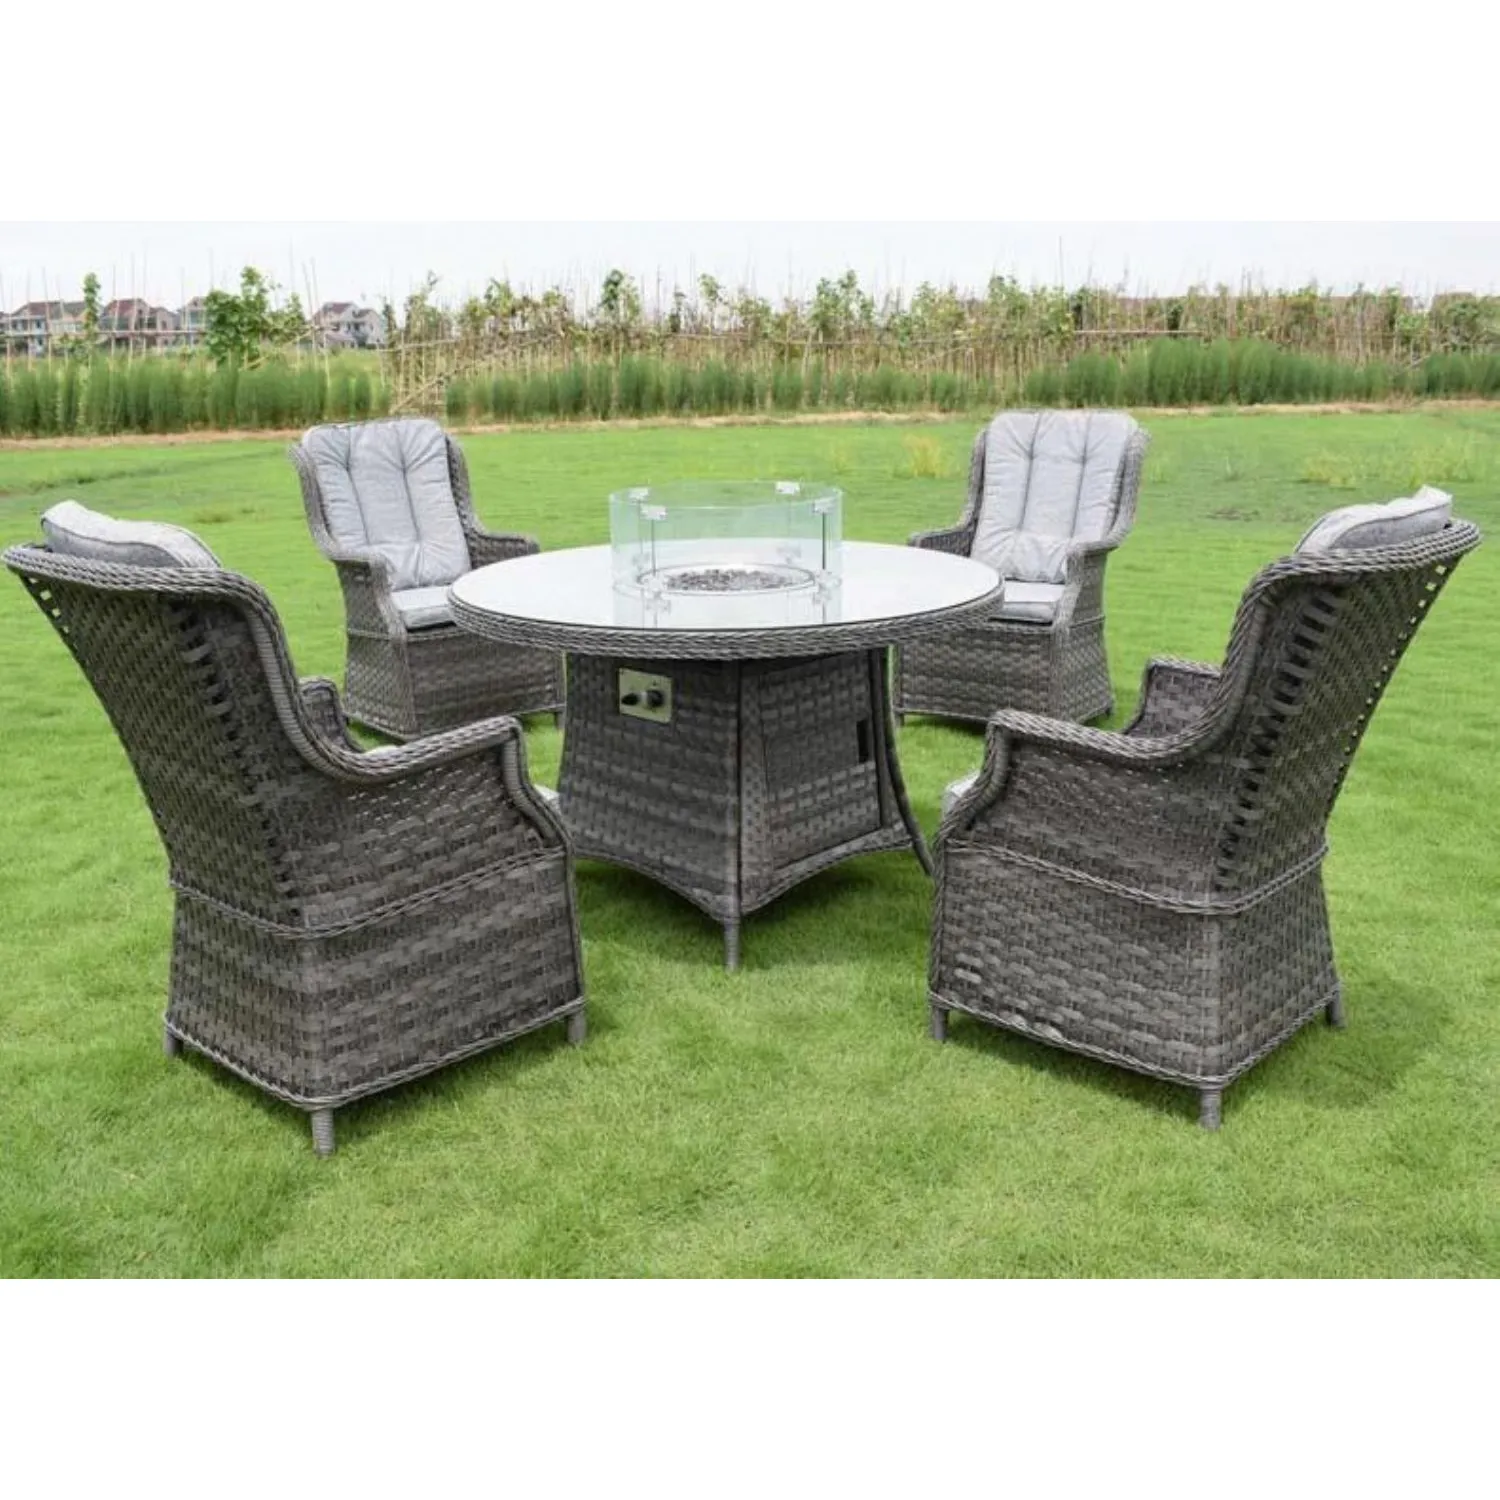 Luxury Rattan 4 Seat Round Dining Set with Fire Pit